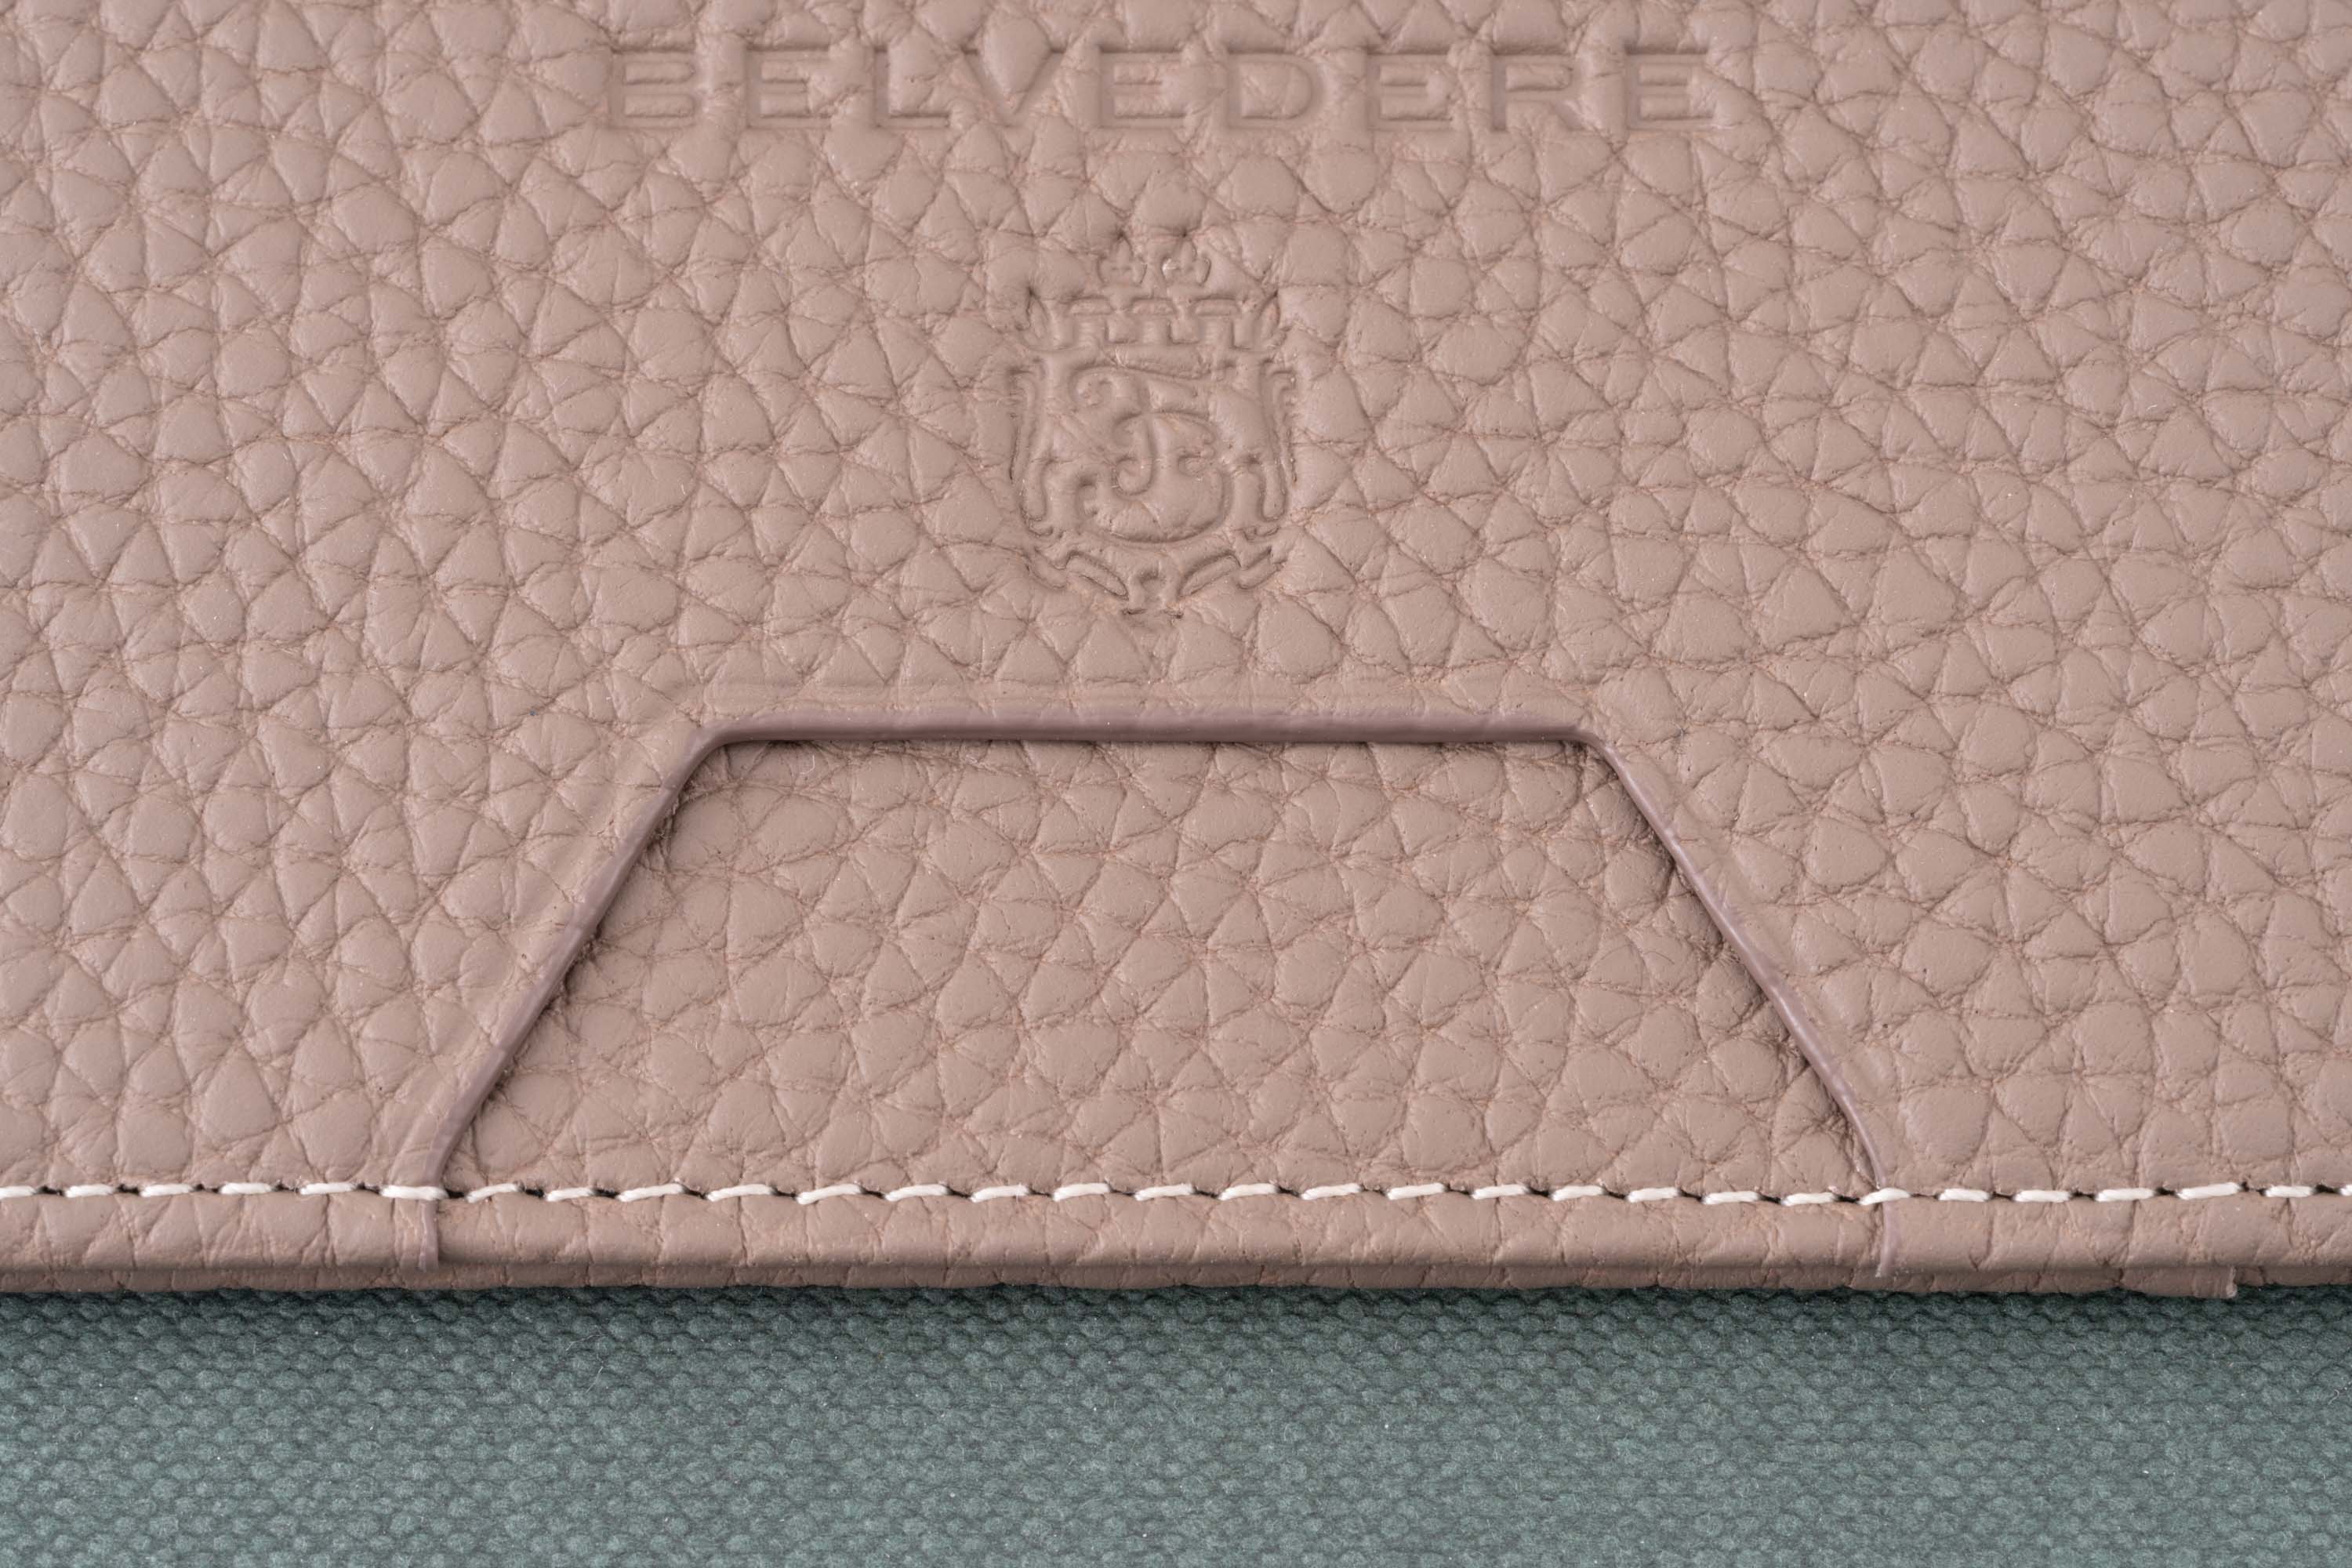 Slim Wallet - 4CC - Boardroom Taupe Togo Full-Grain Leather is tastefully embossed with the Fort Belvedere branding. 